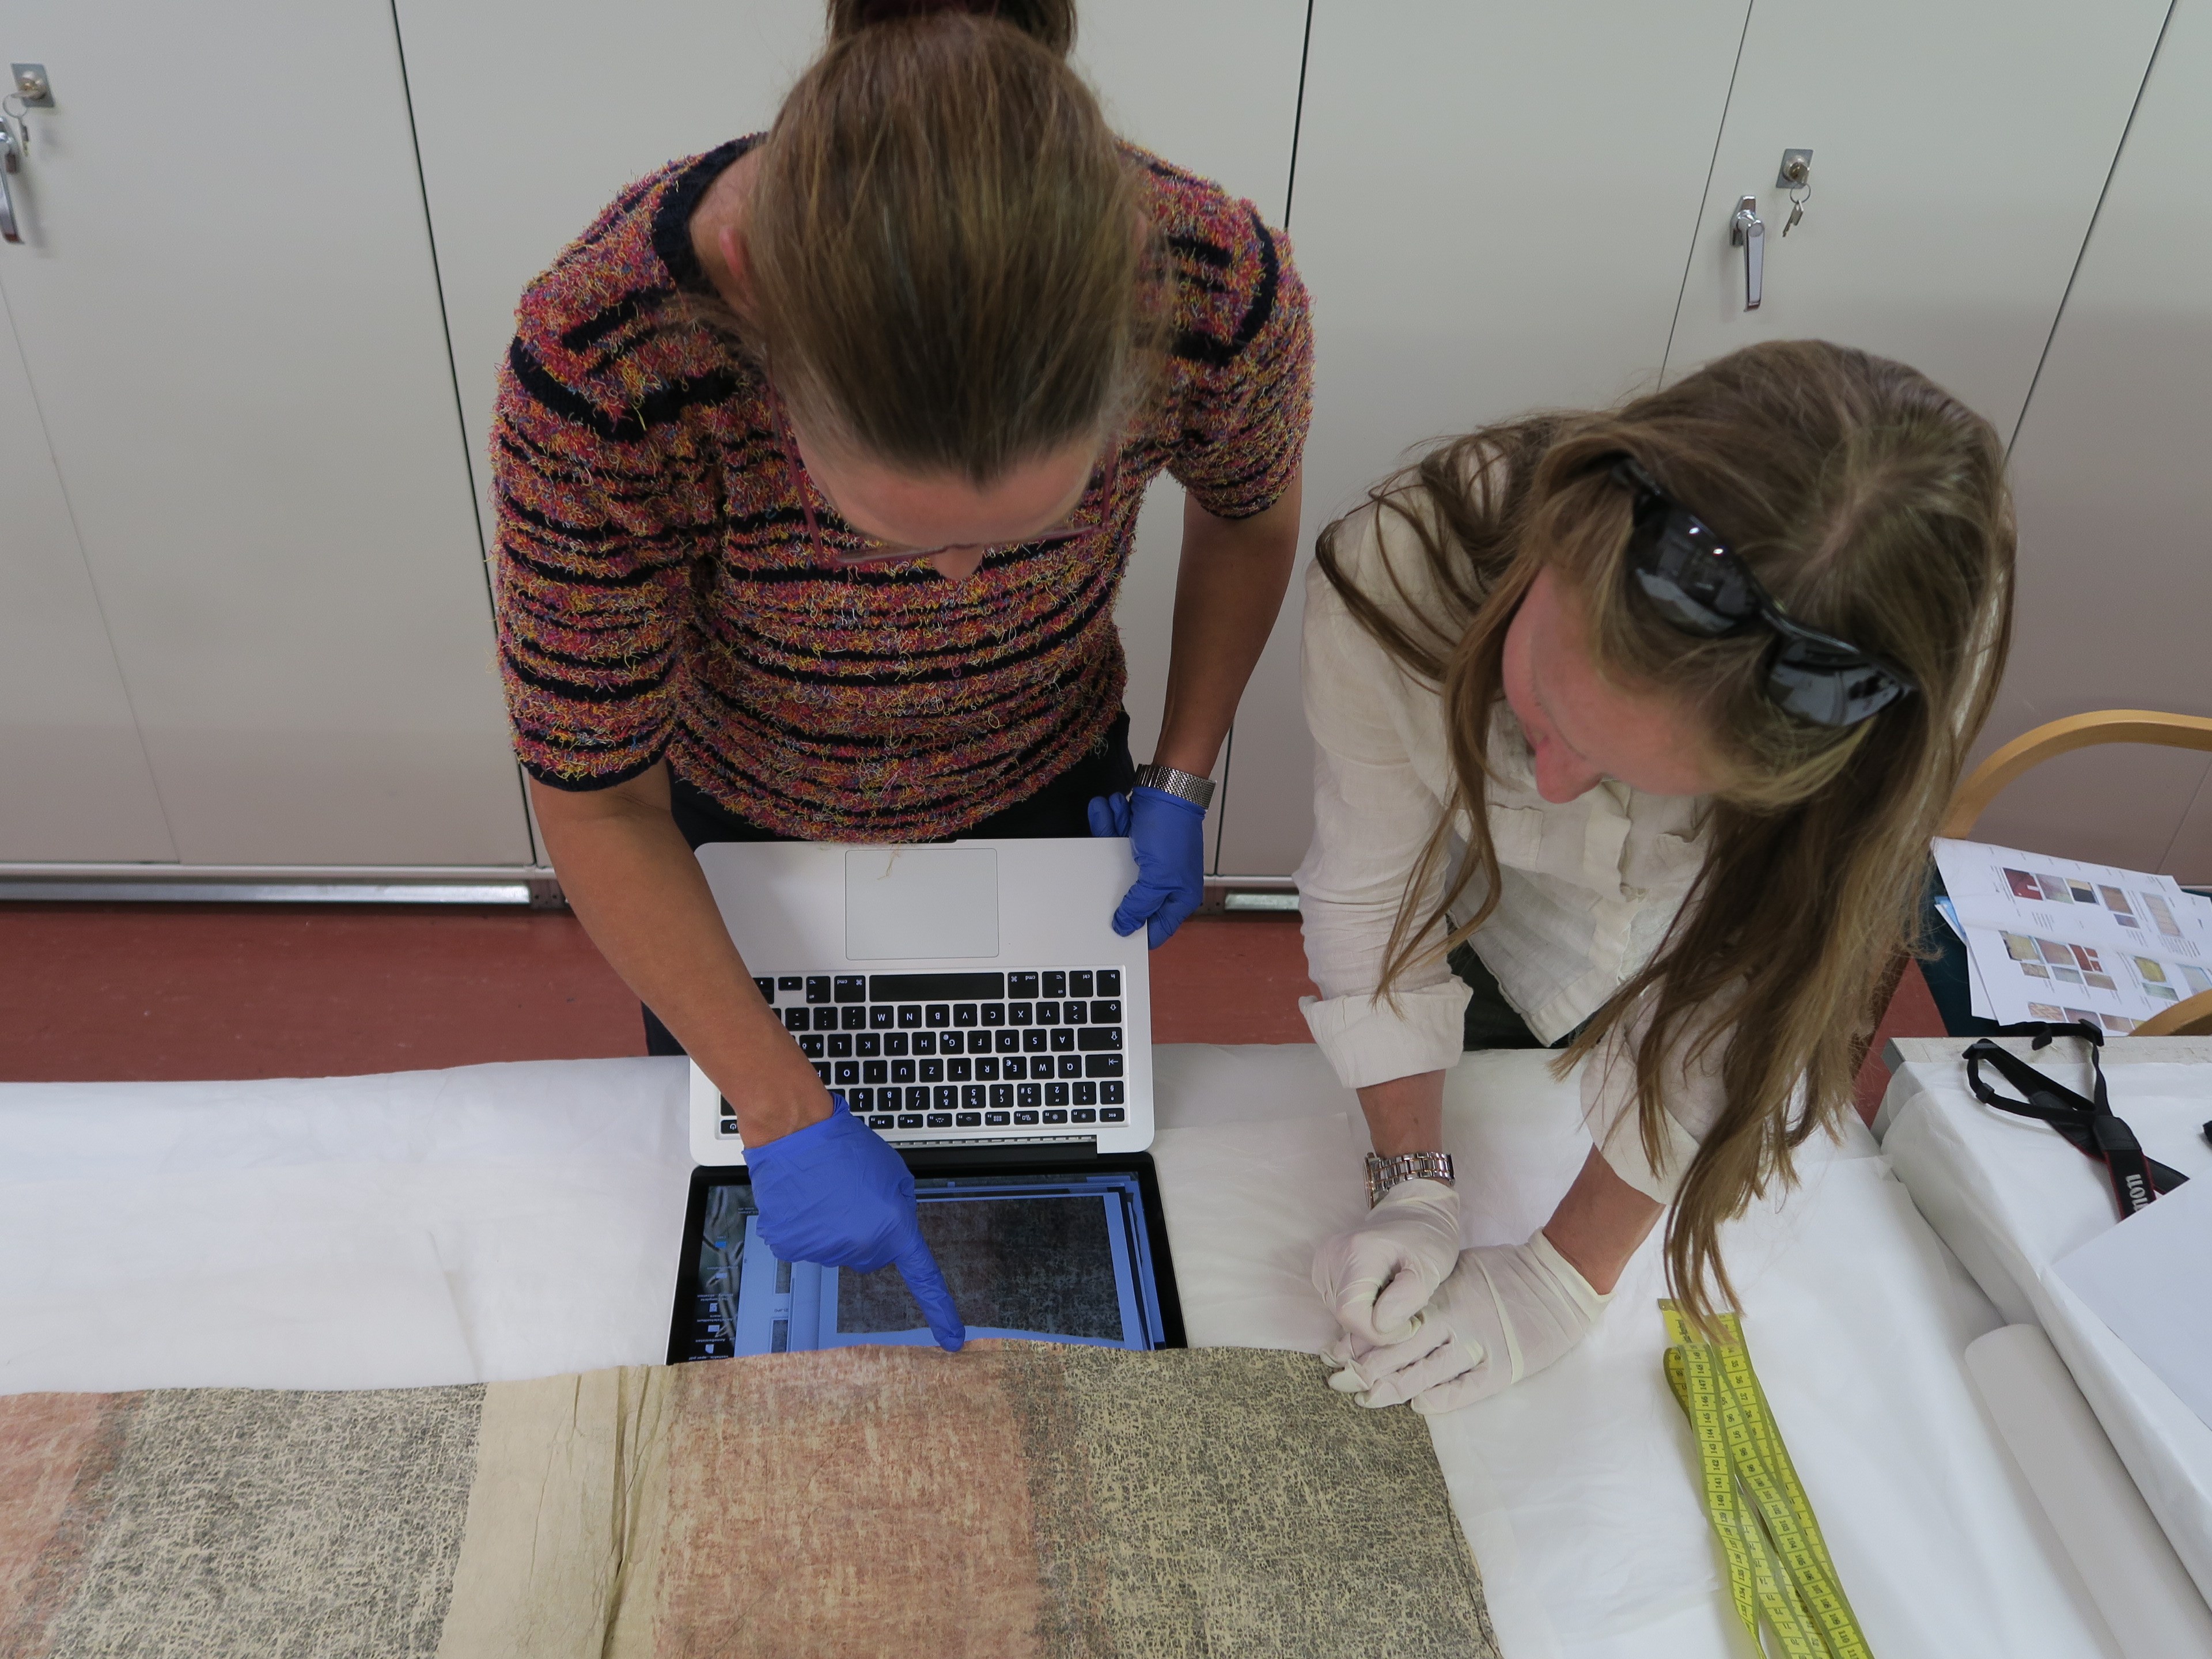 Antje Denner and Fiona Reilly leaning over a table comparing barkcloth 1881.2651 with a digital image of barkcloth A.UC.441.